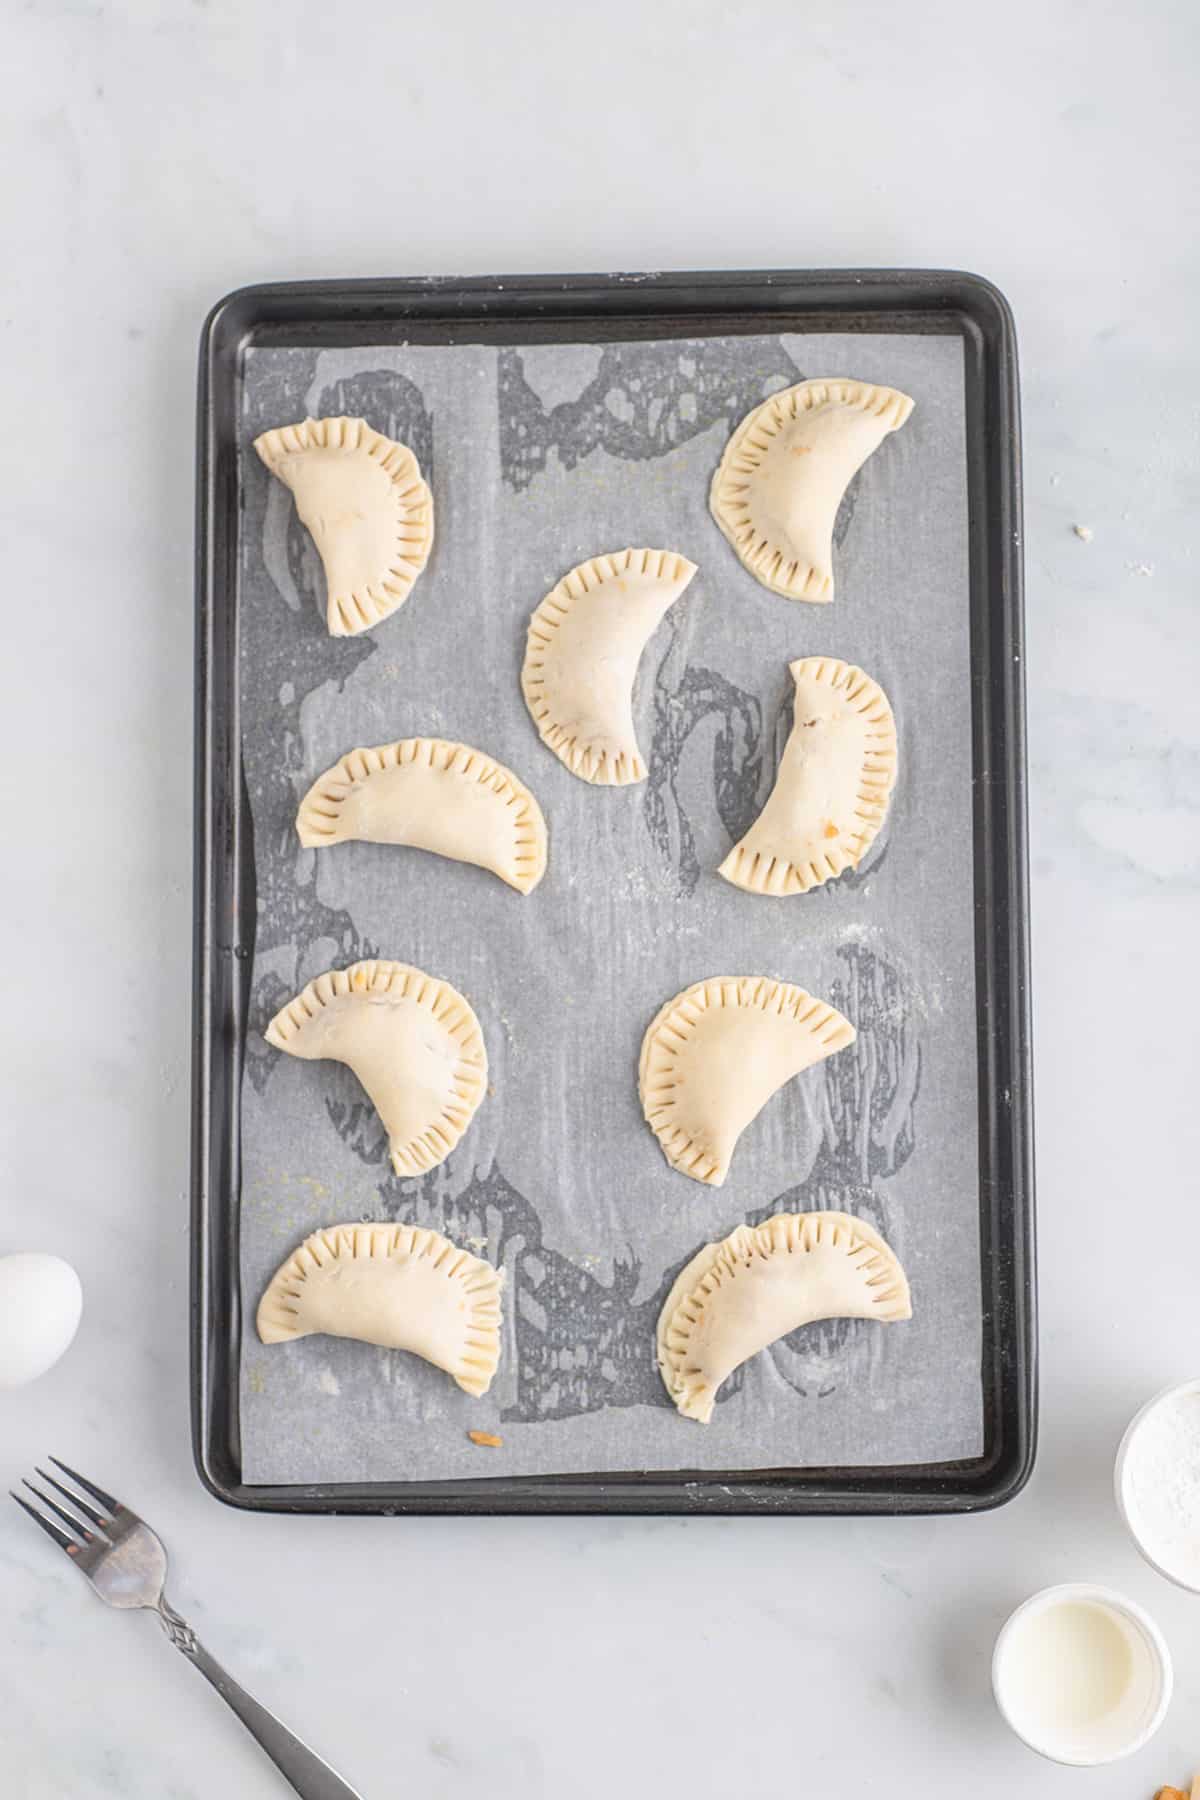 Pies placed on a parchment lined baking sheet.